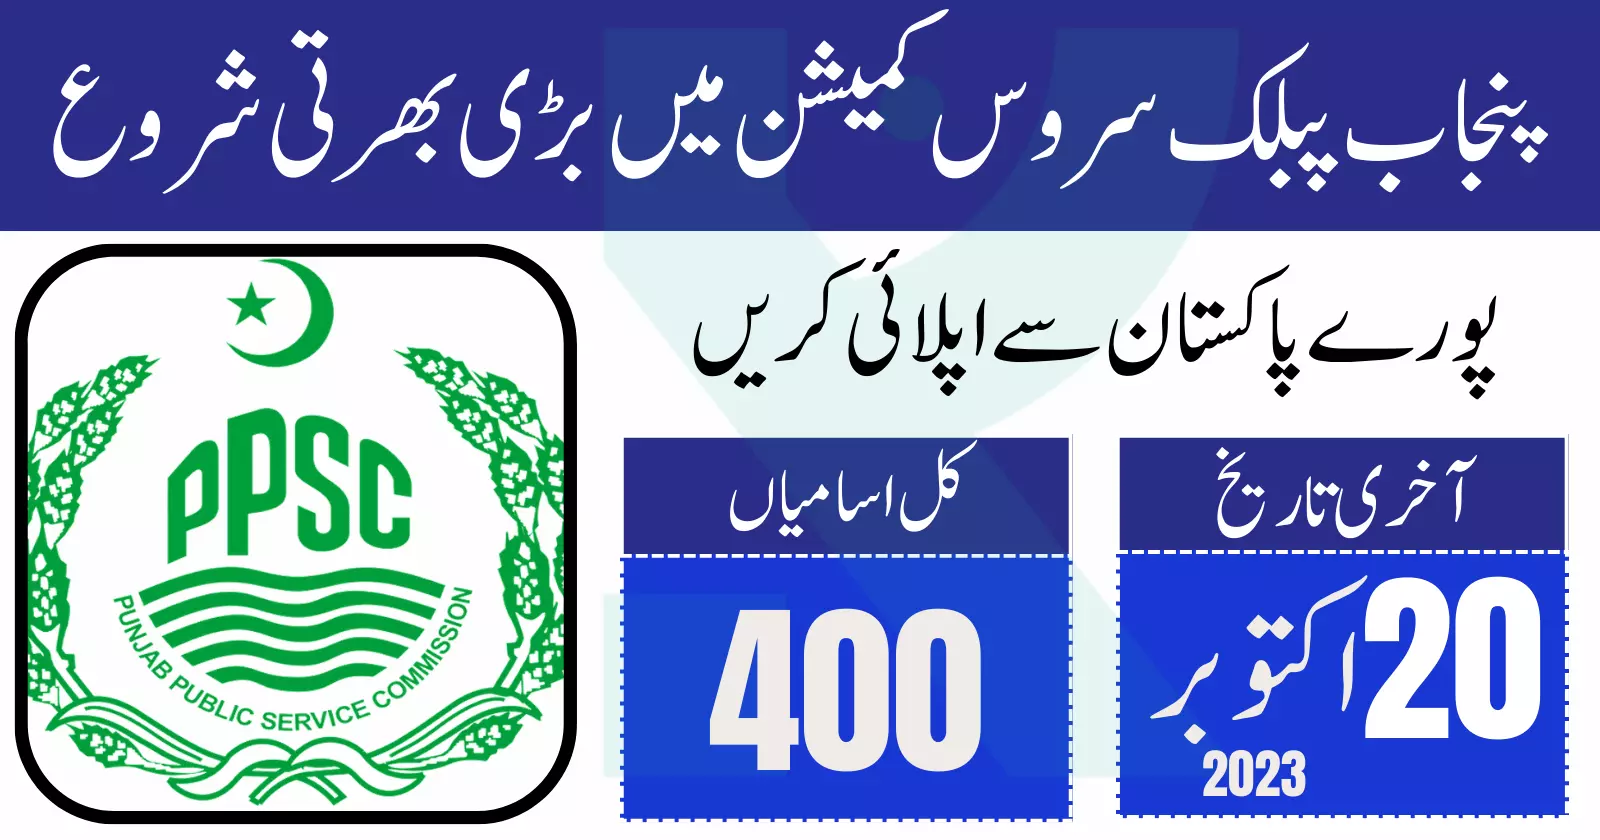 Punjab Public Service Commission: A Beacon of Opportunity